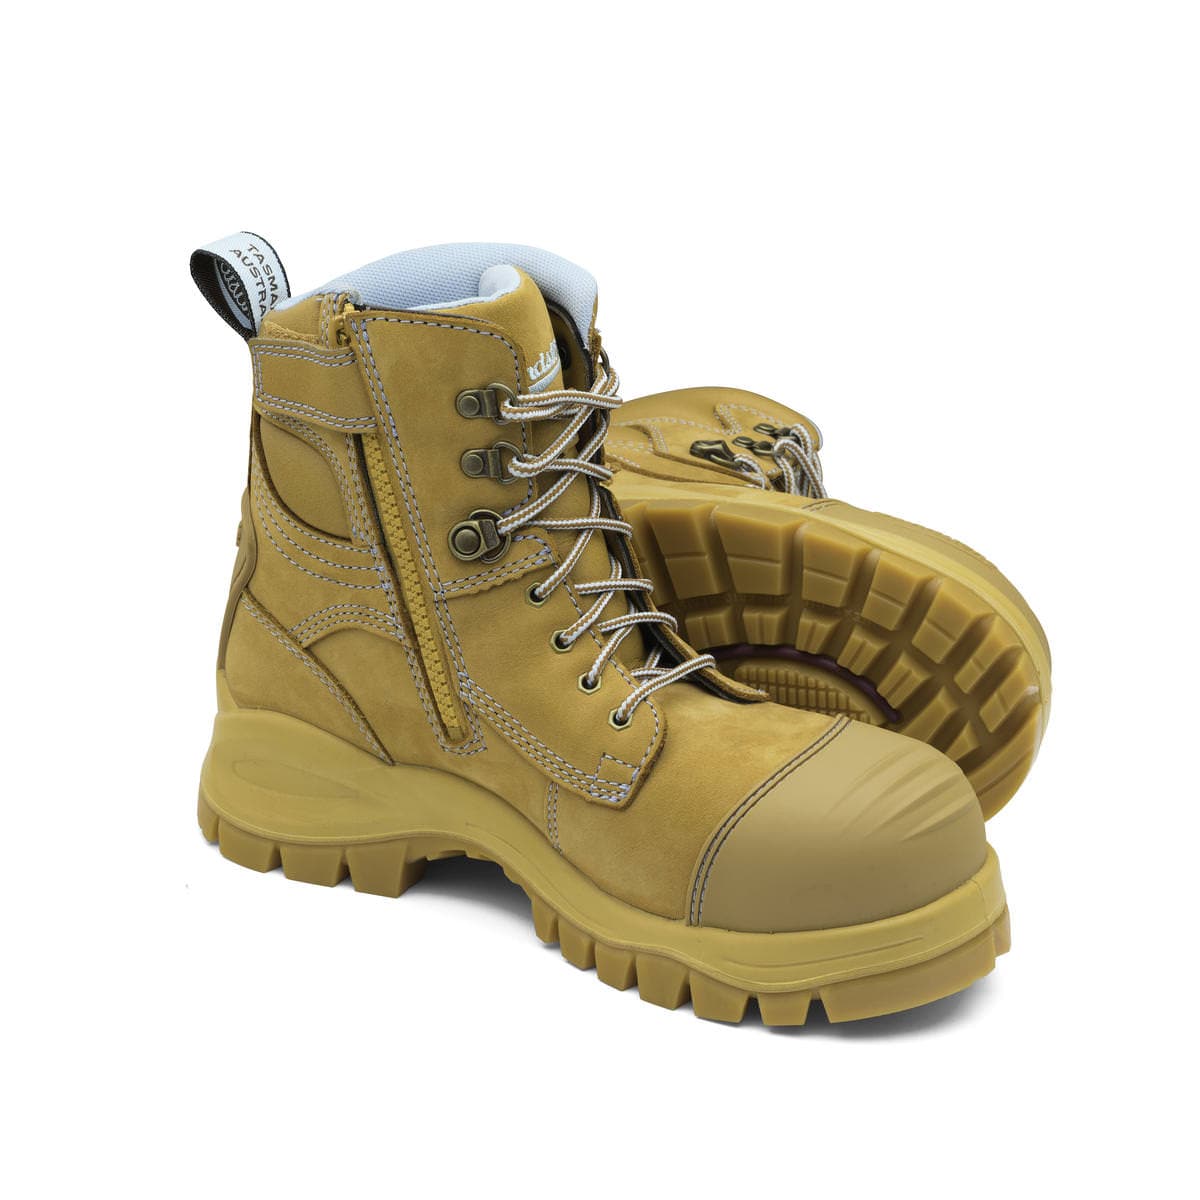 Blundstone Women's Safety Series Safety Boots - Wheat #892